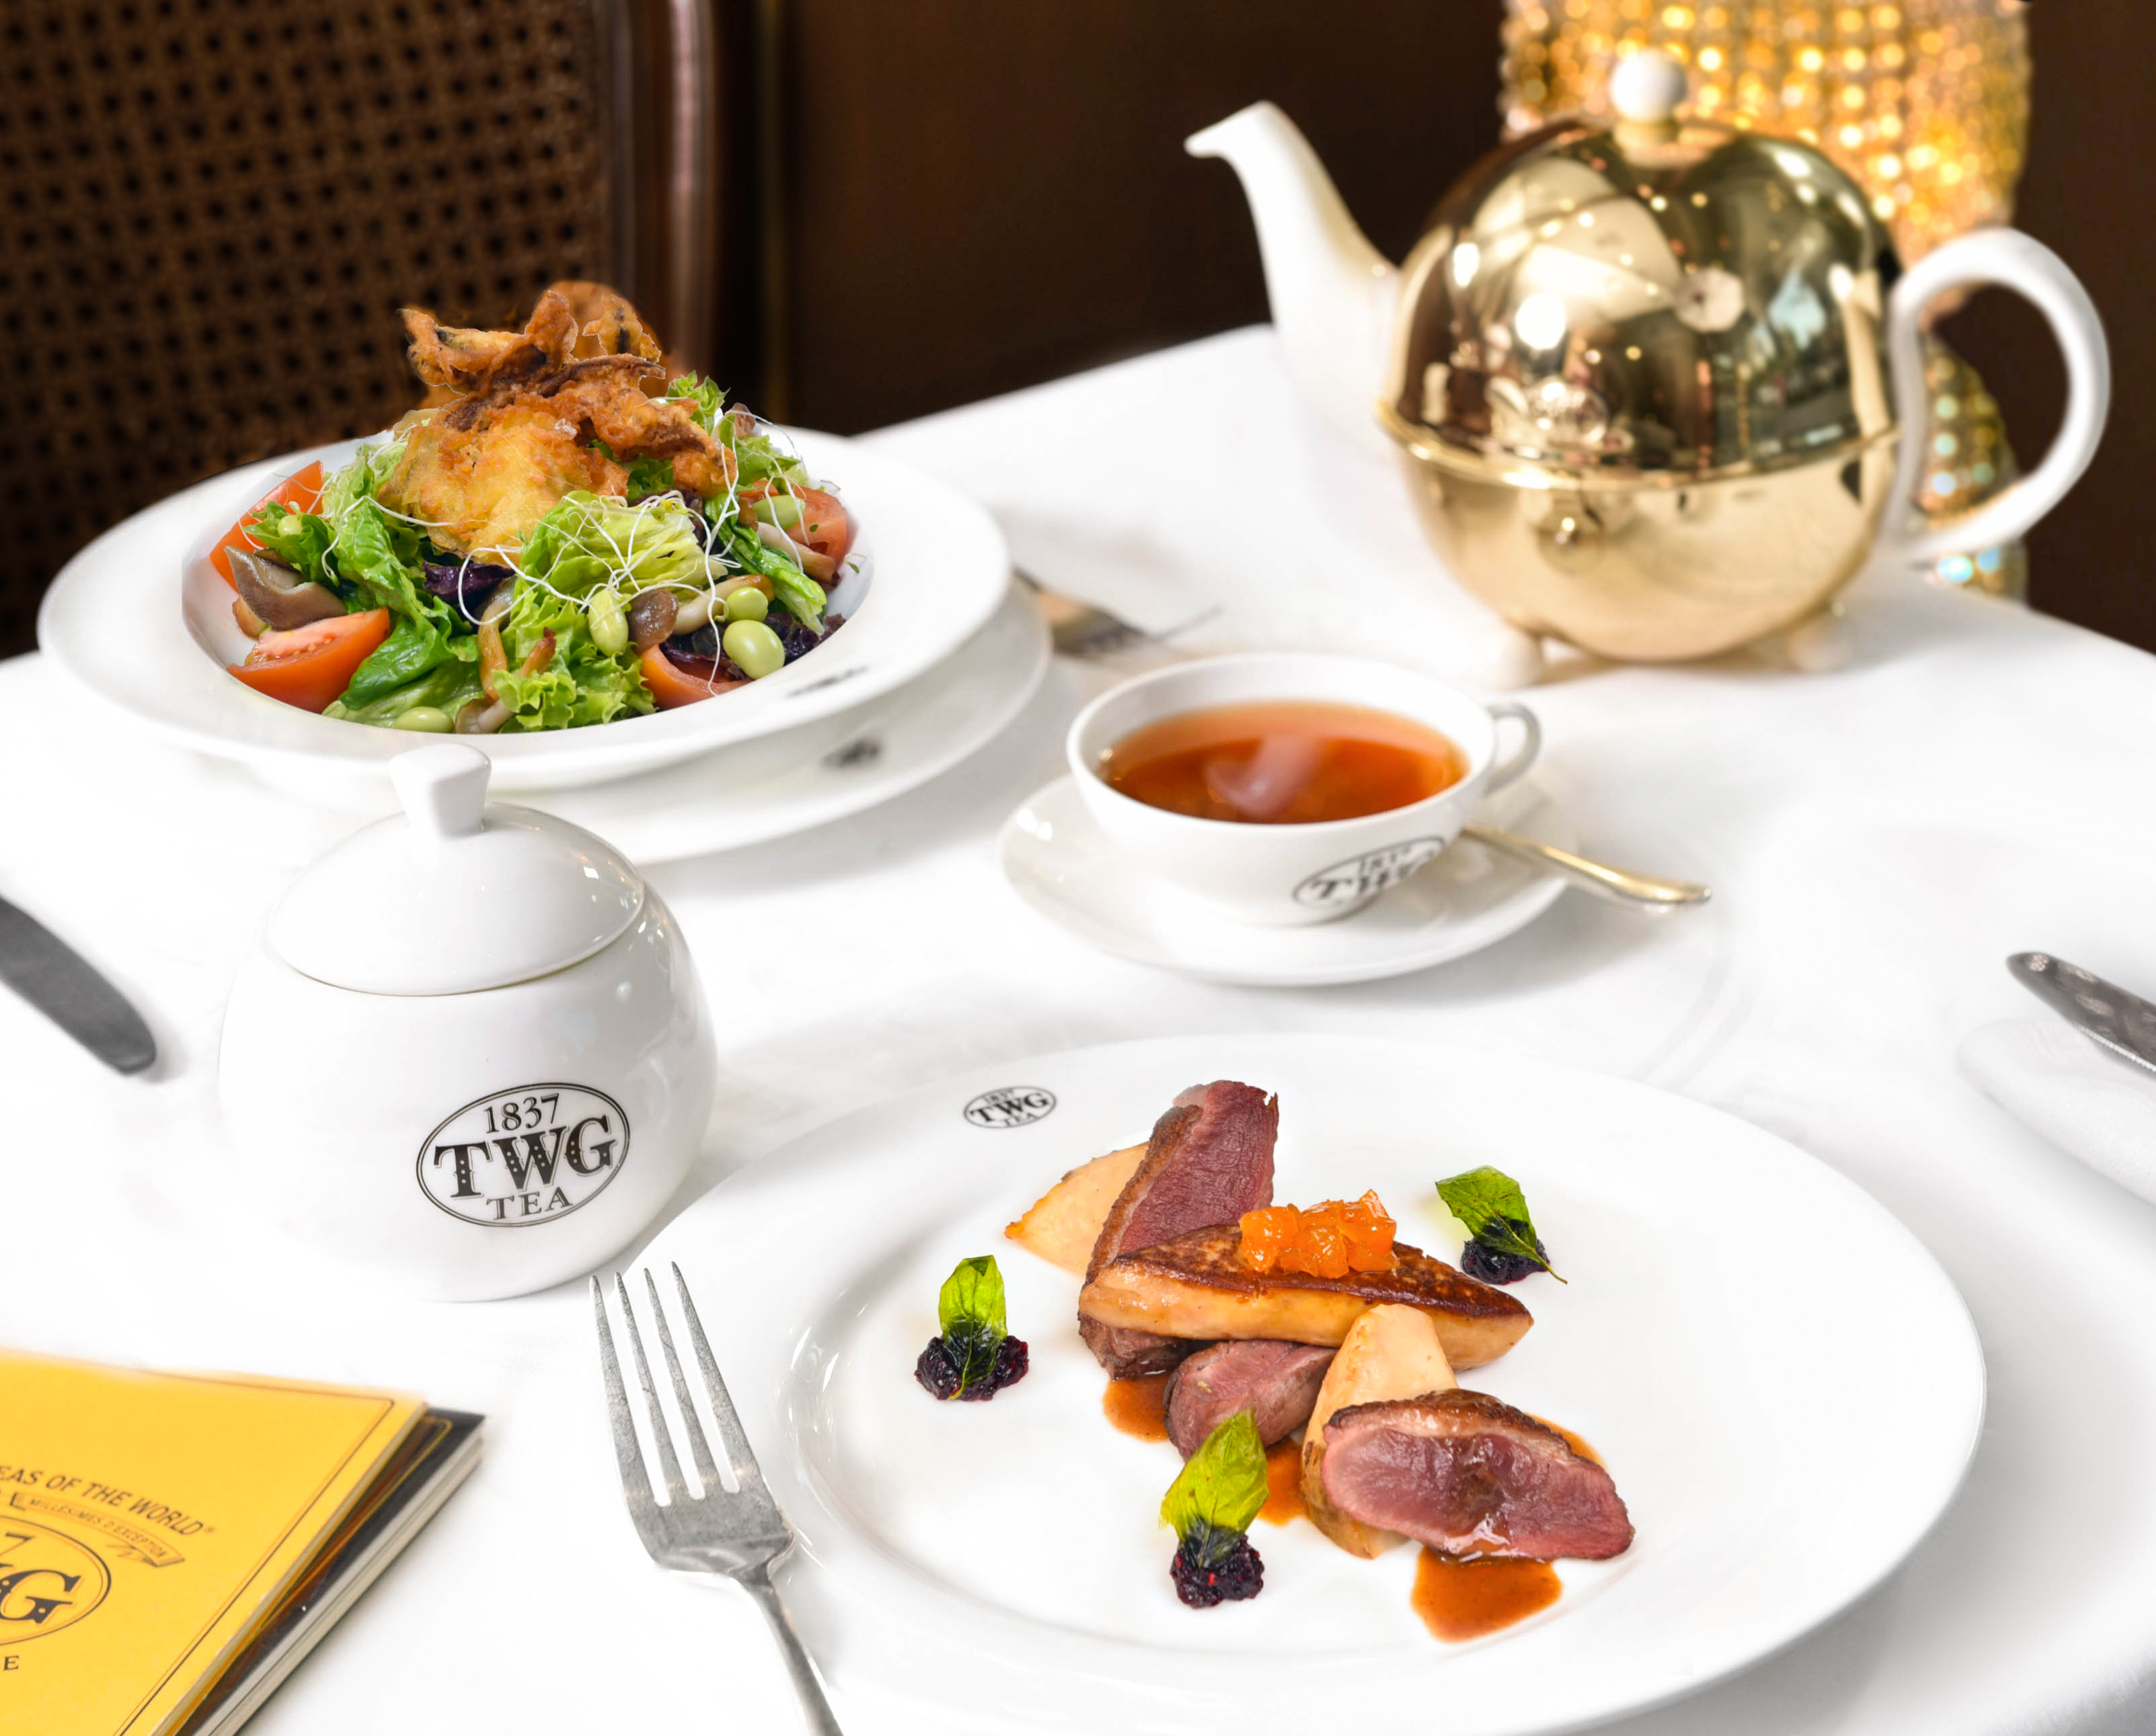 TWG celebrates its sixth year in PH with a special menu